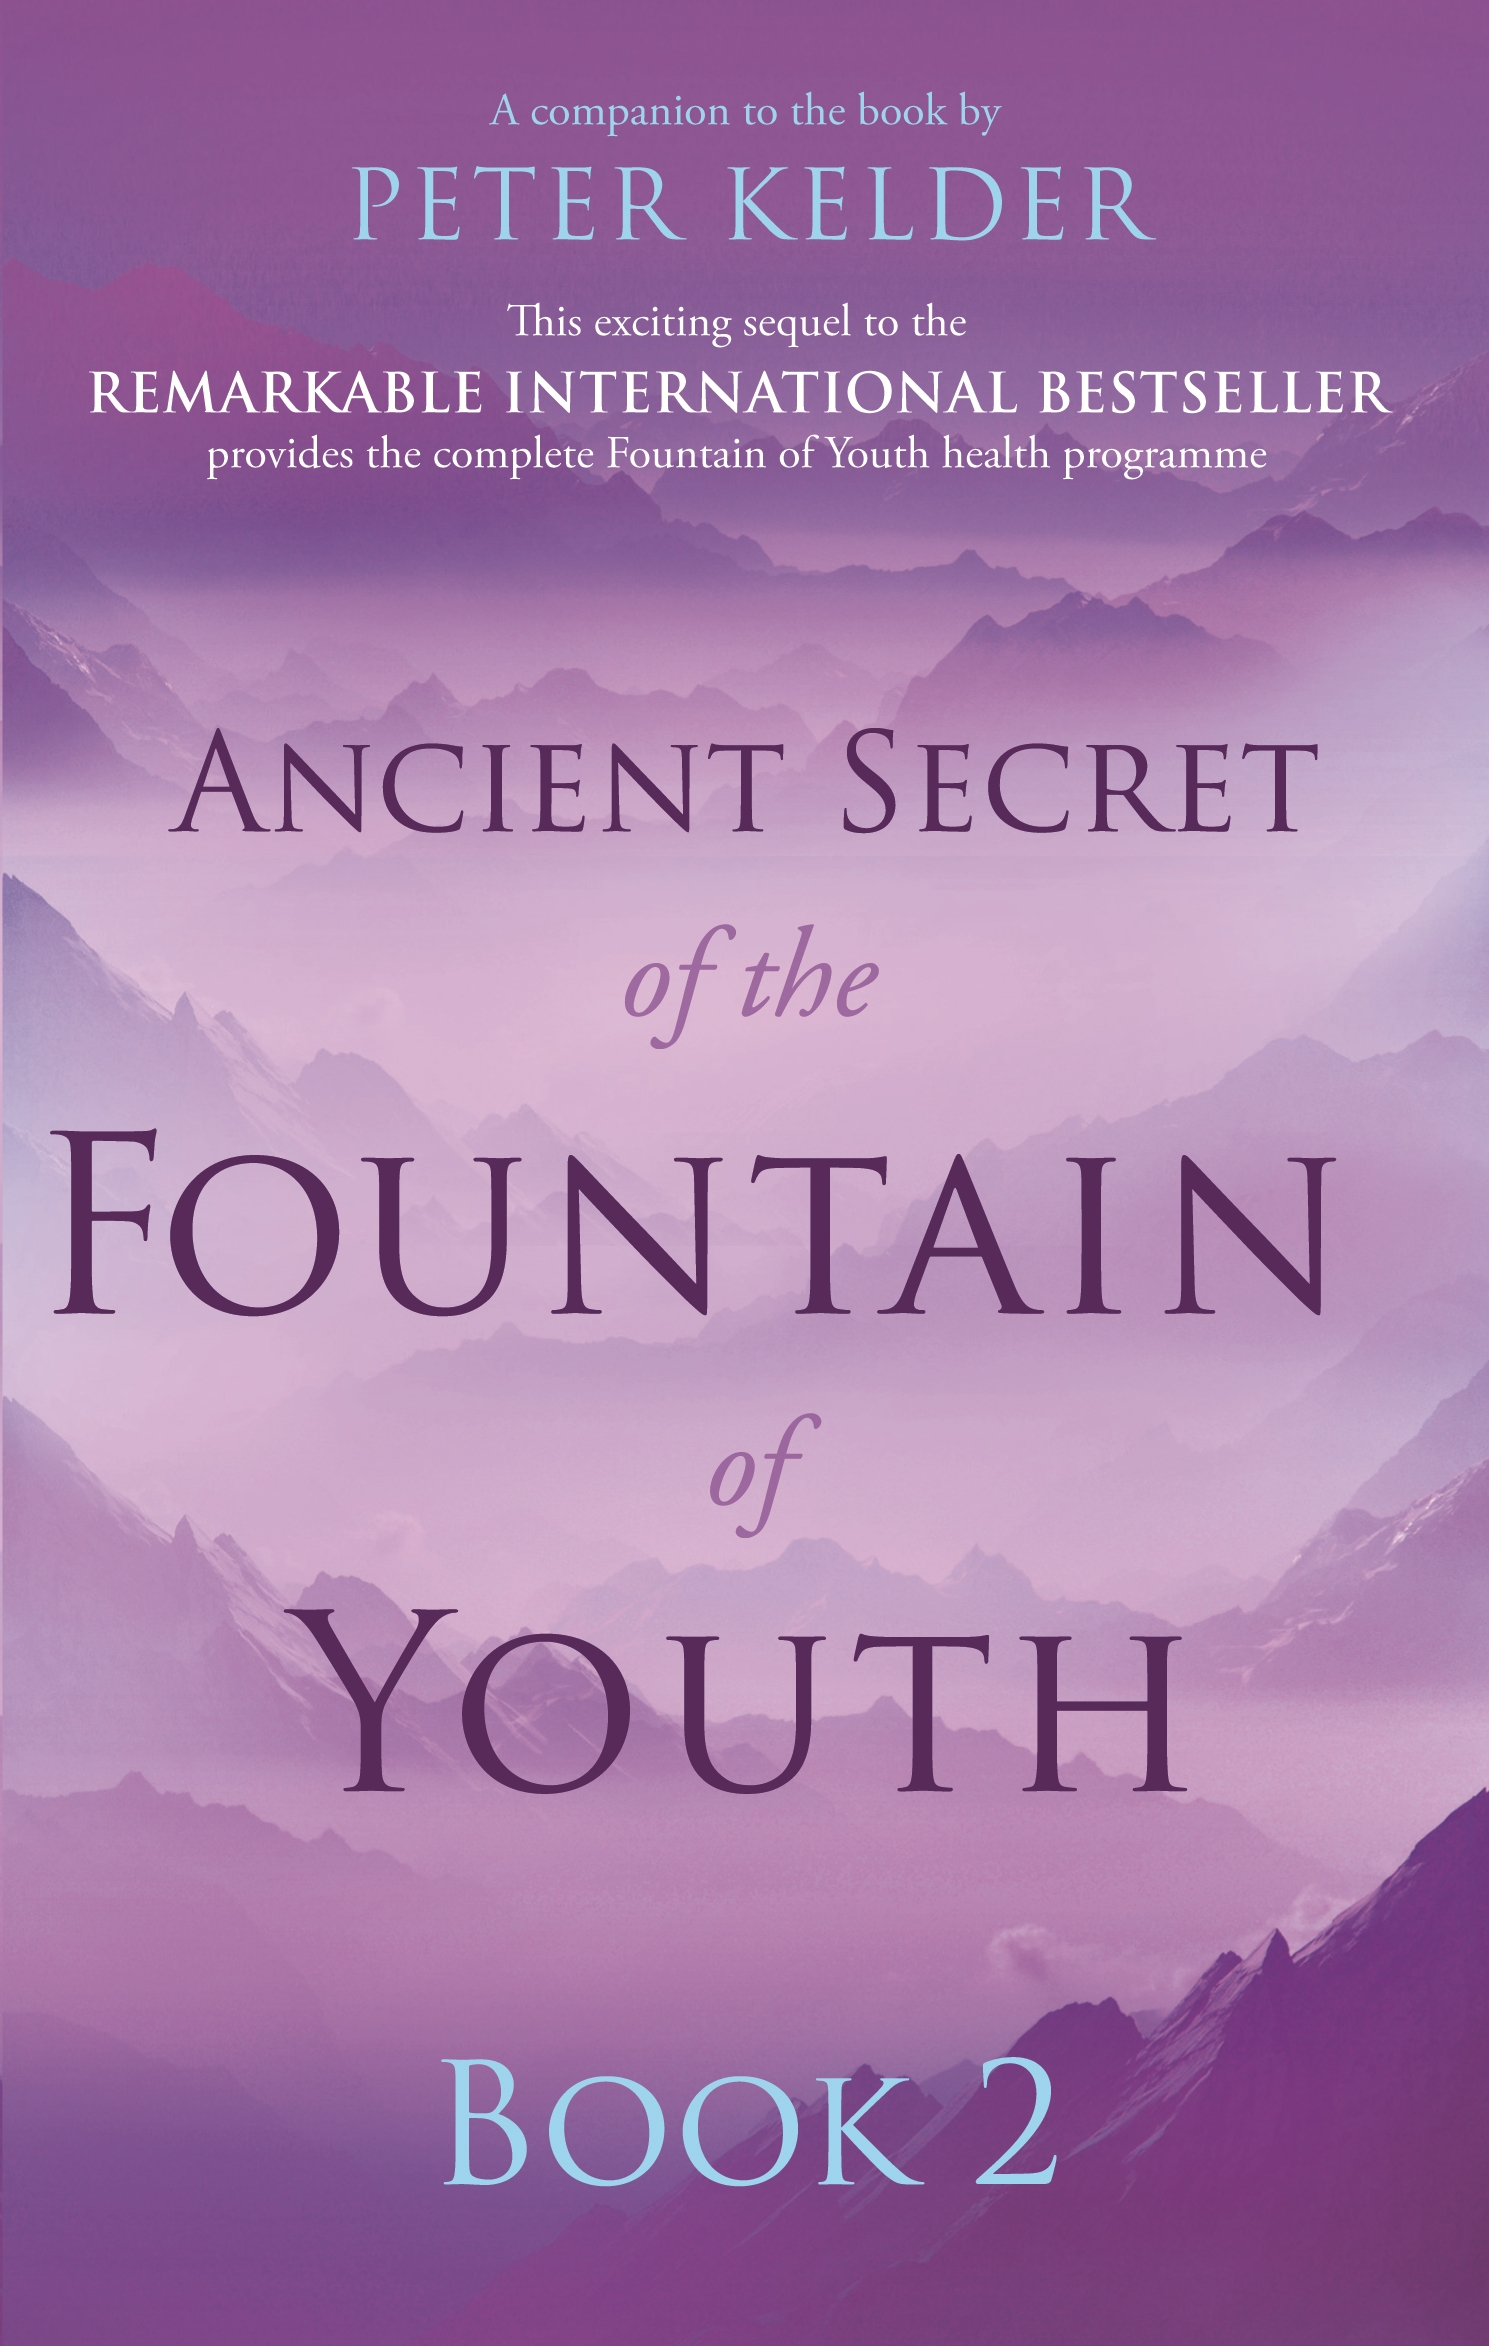 Ancient Secret of the Fountain of Youth Book 2 by Peter Kelder ...